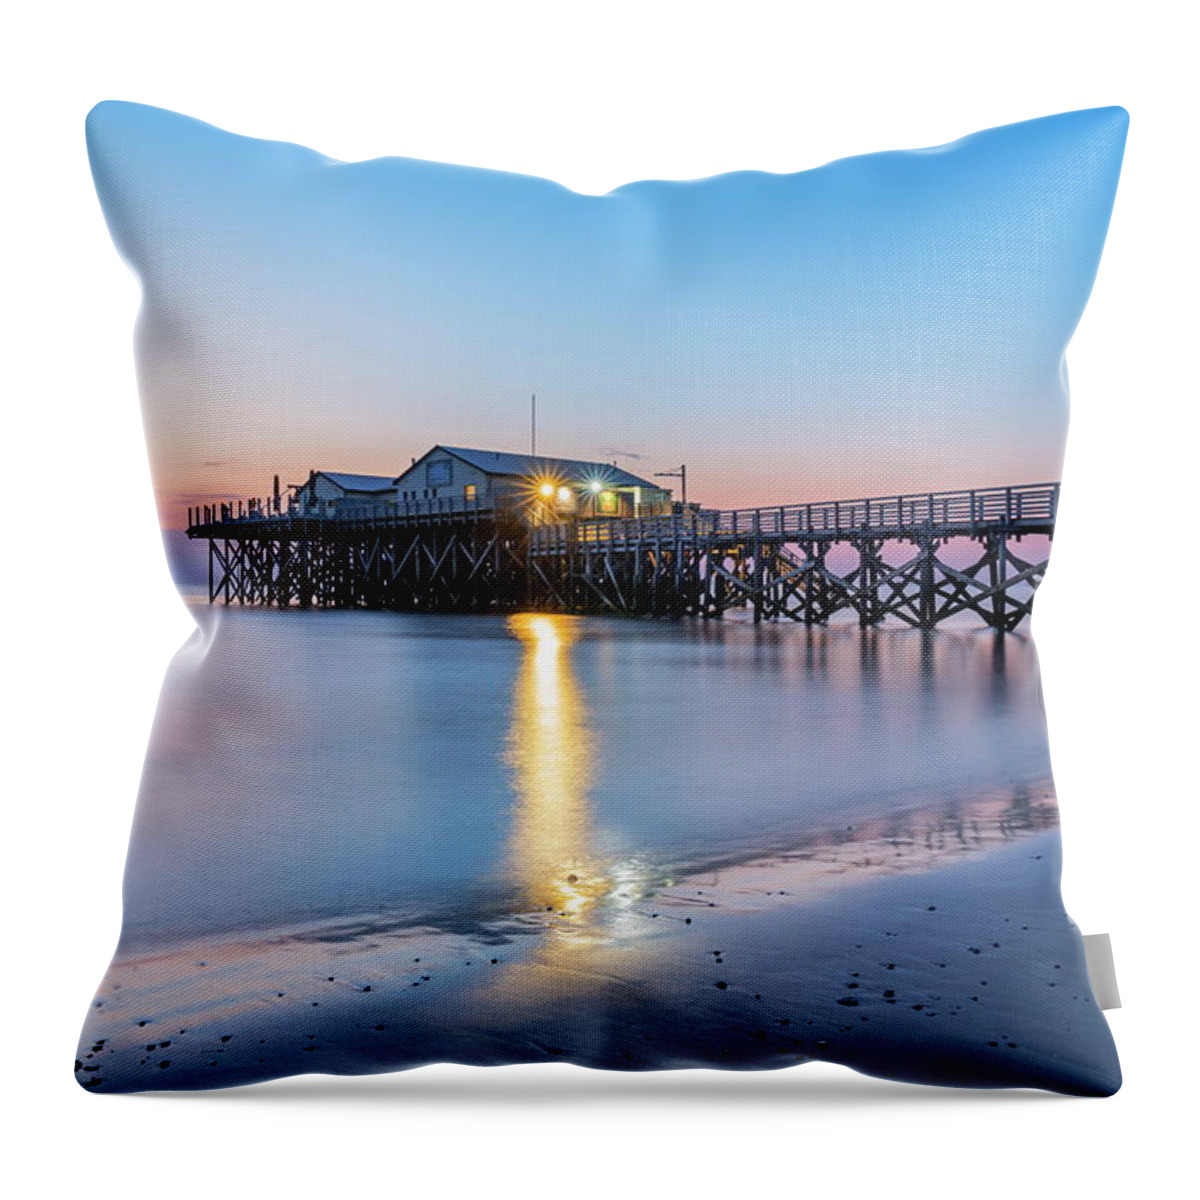 Estock Throw Pillow featuring the digital art House On Stilts by Christian Back